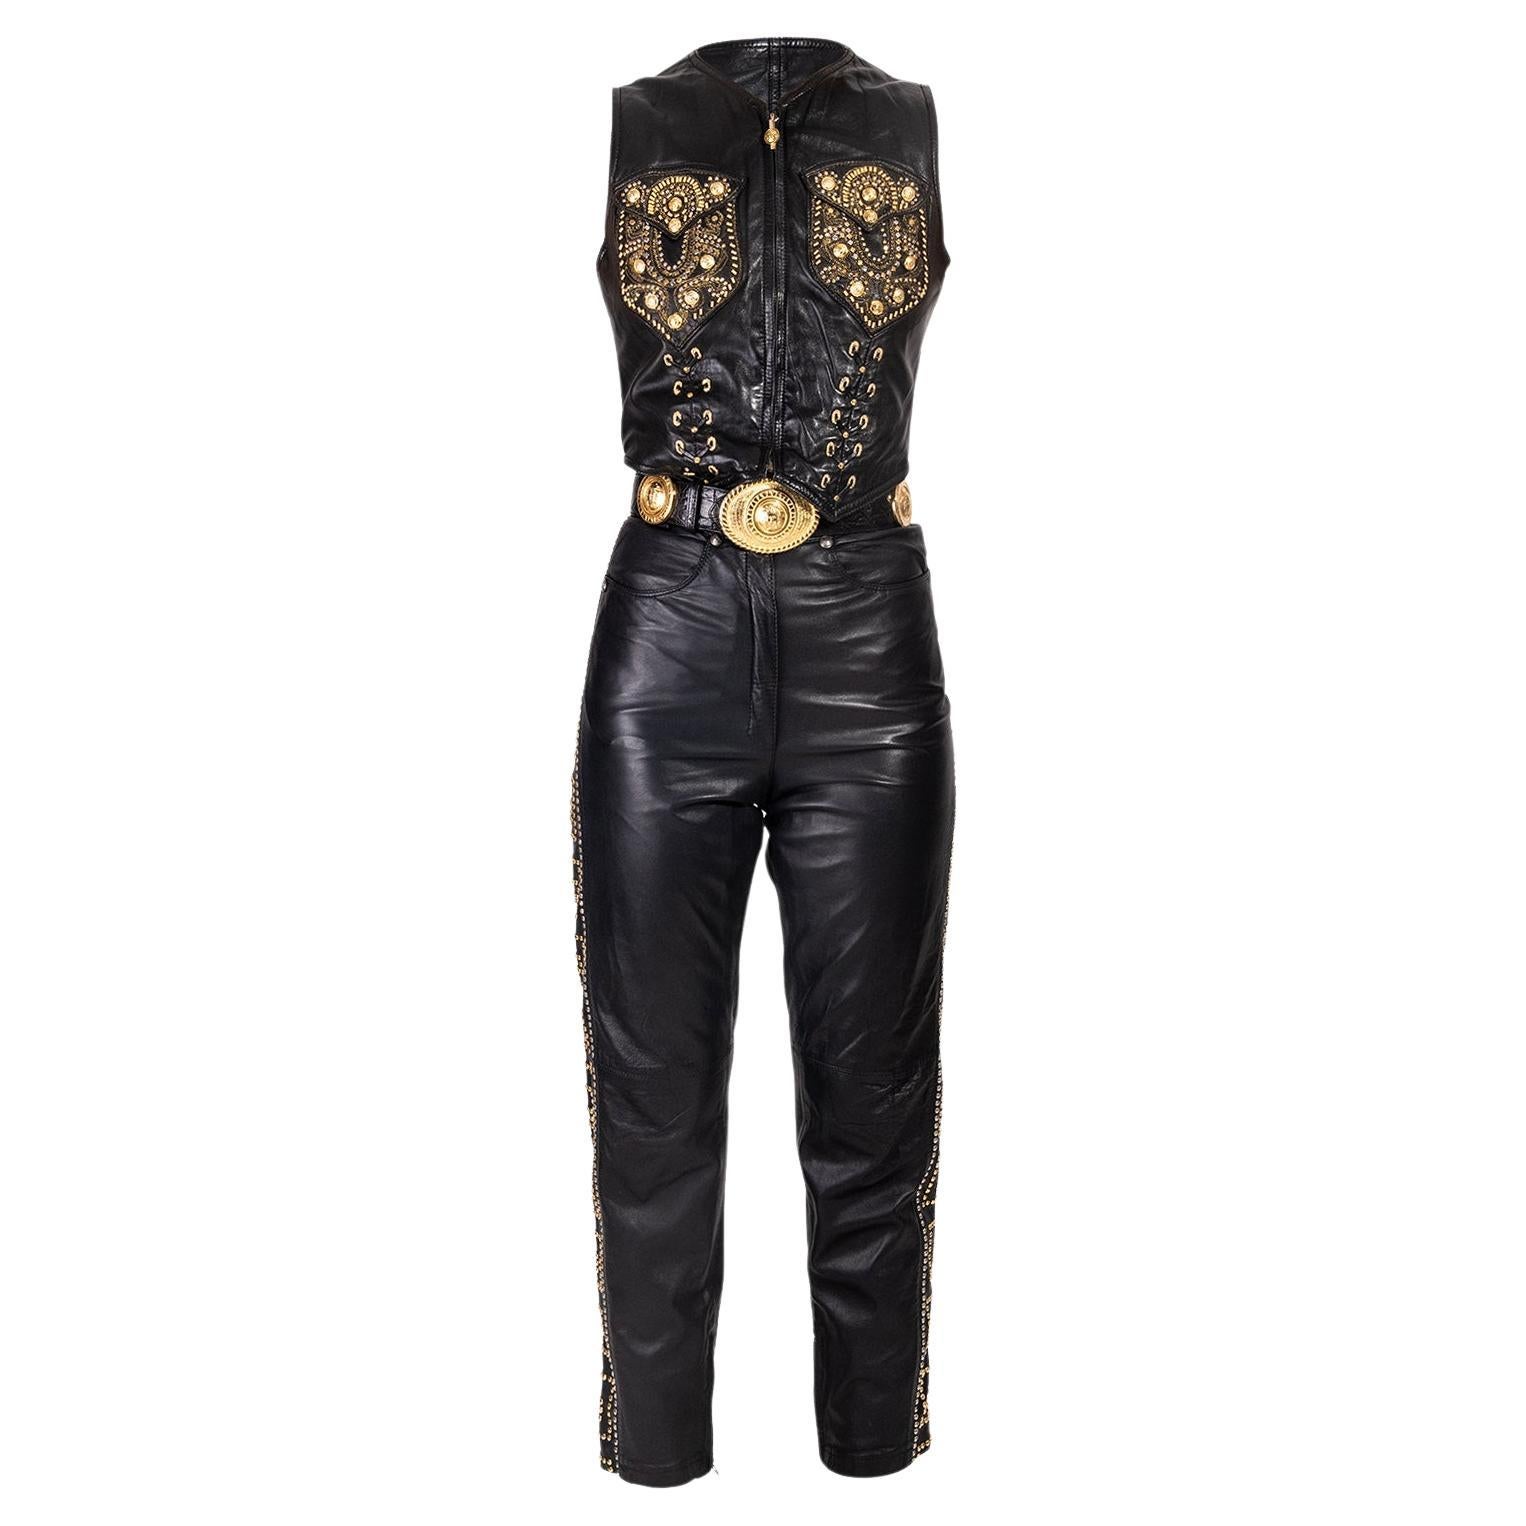 A/W 1992 Gianni Versace Leather Vest, Pant and Belt Set with Gold Stud Details